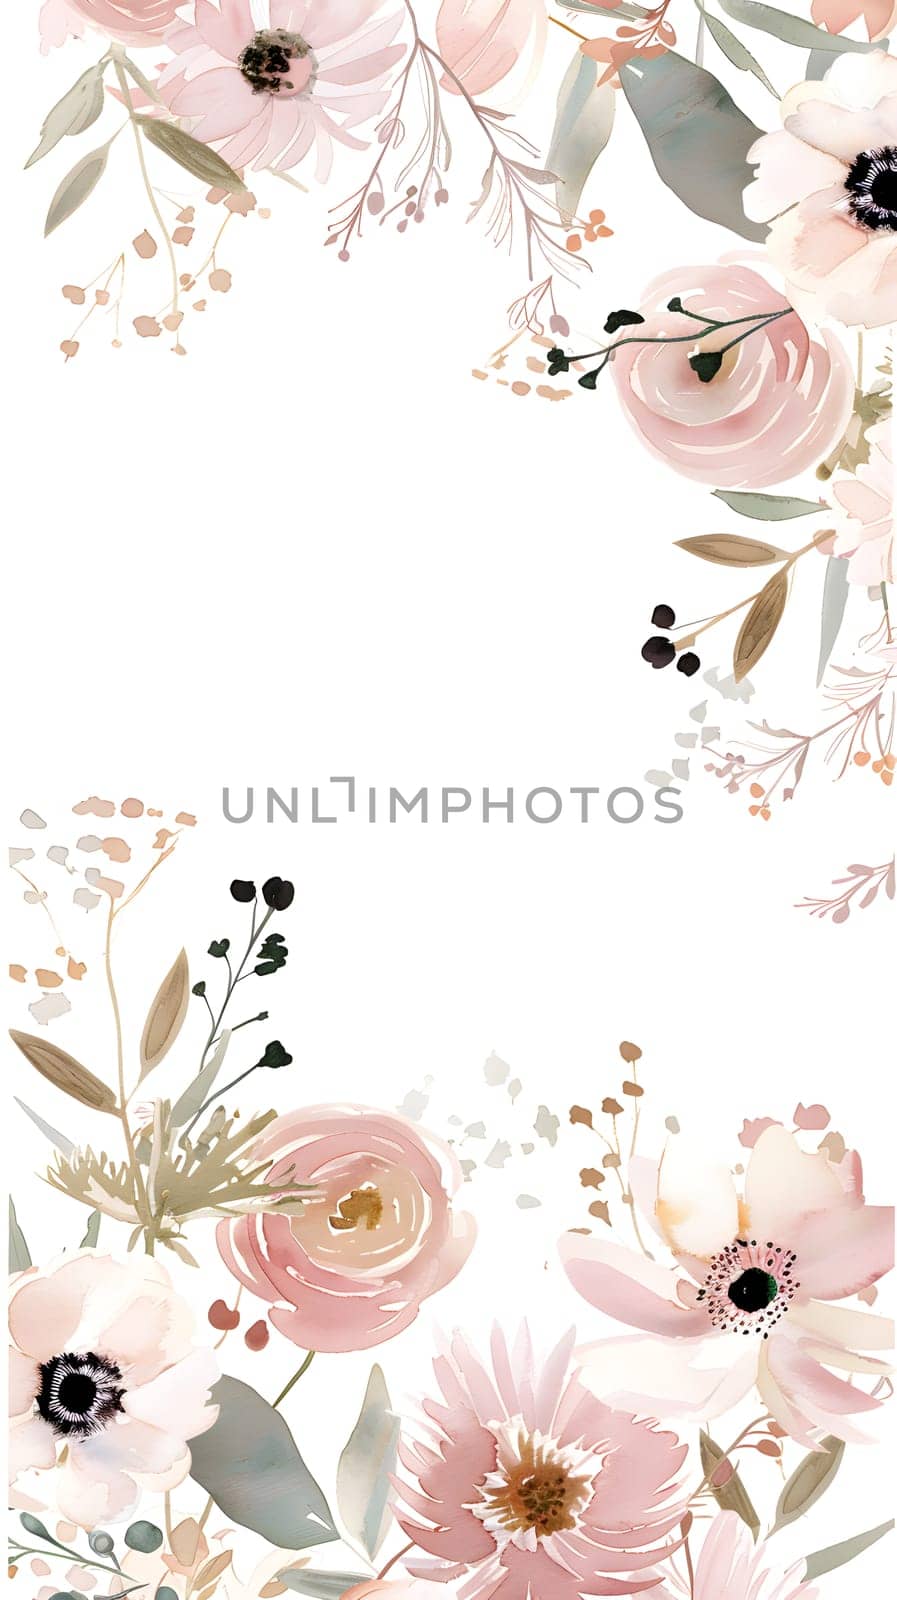 A creative floral frame with pink flowers and green leaves on a white background by Nadtochiy